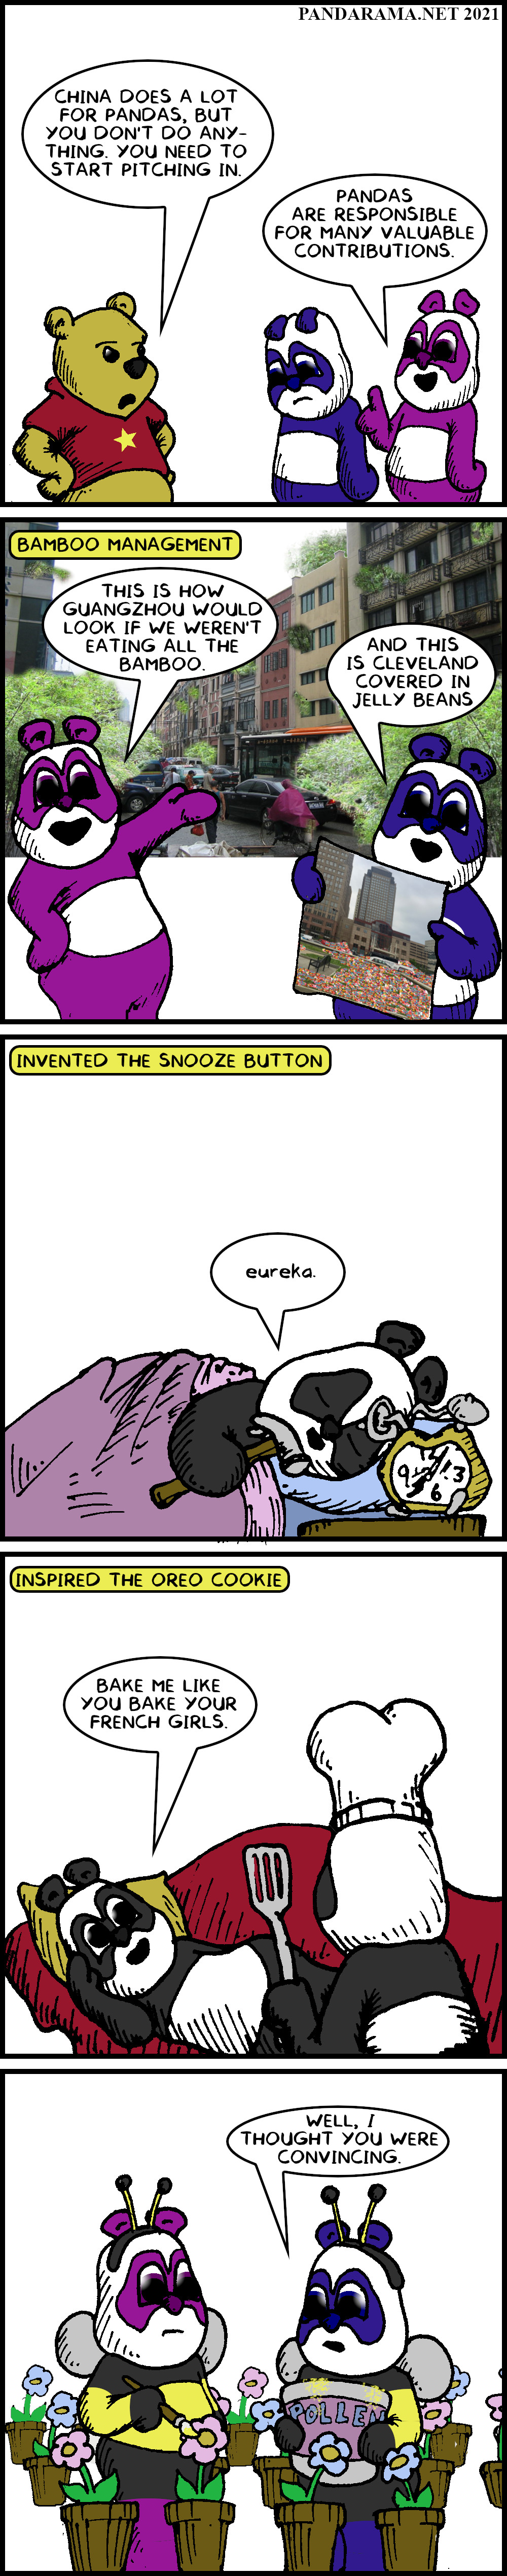 panadarama comic strip. pandas defend their utility to the Chinese. Pandas control bamboo, invented the snooze button, and inspired the oreo cookie. China puts them to work pollinating, dressed as bees.